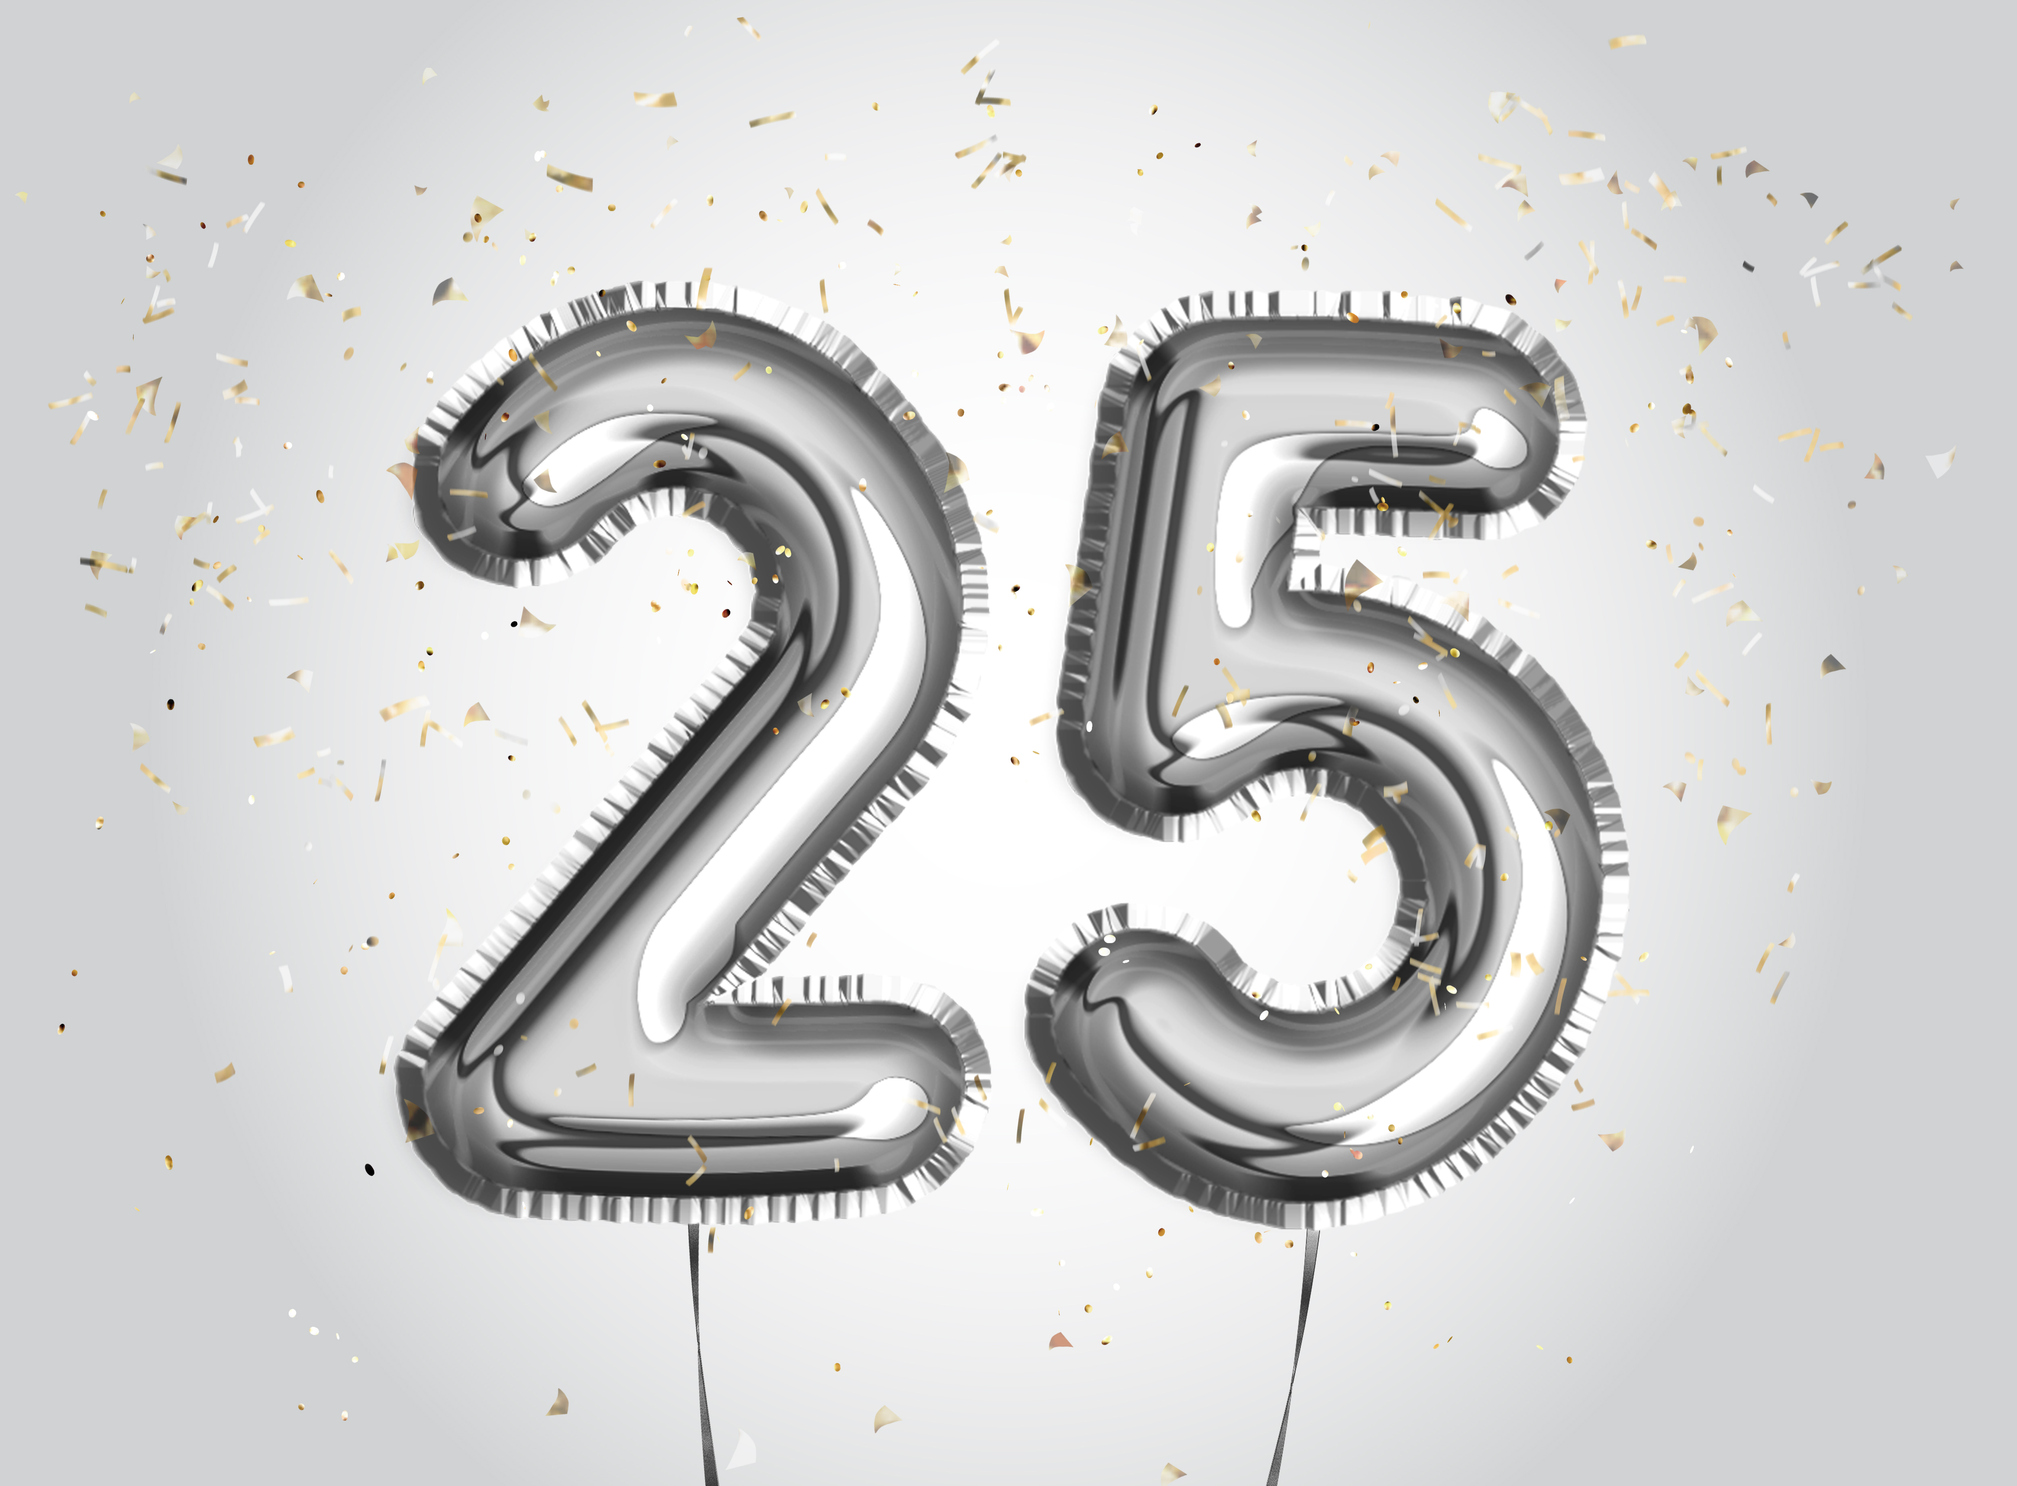 Numerals 25 in silver balloons with confetti